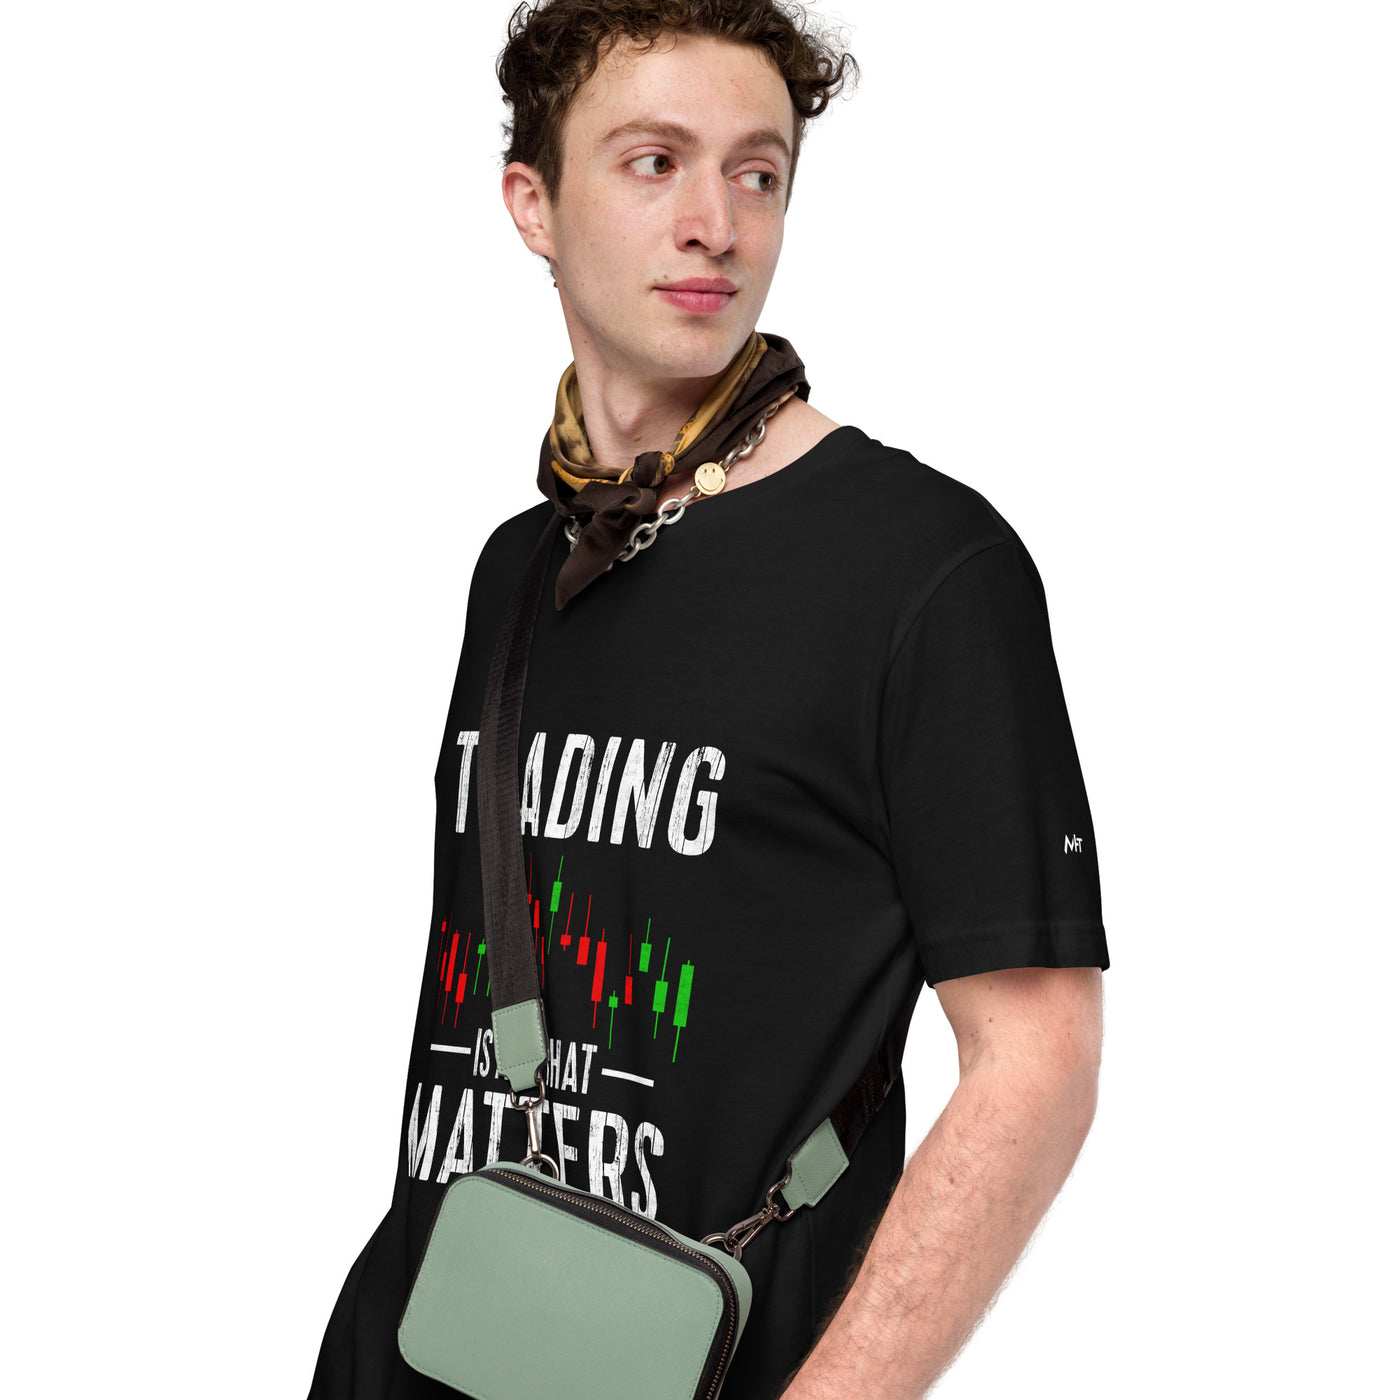 Trading is all that Matters - Unisex t-shirt